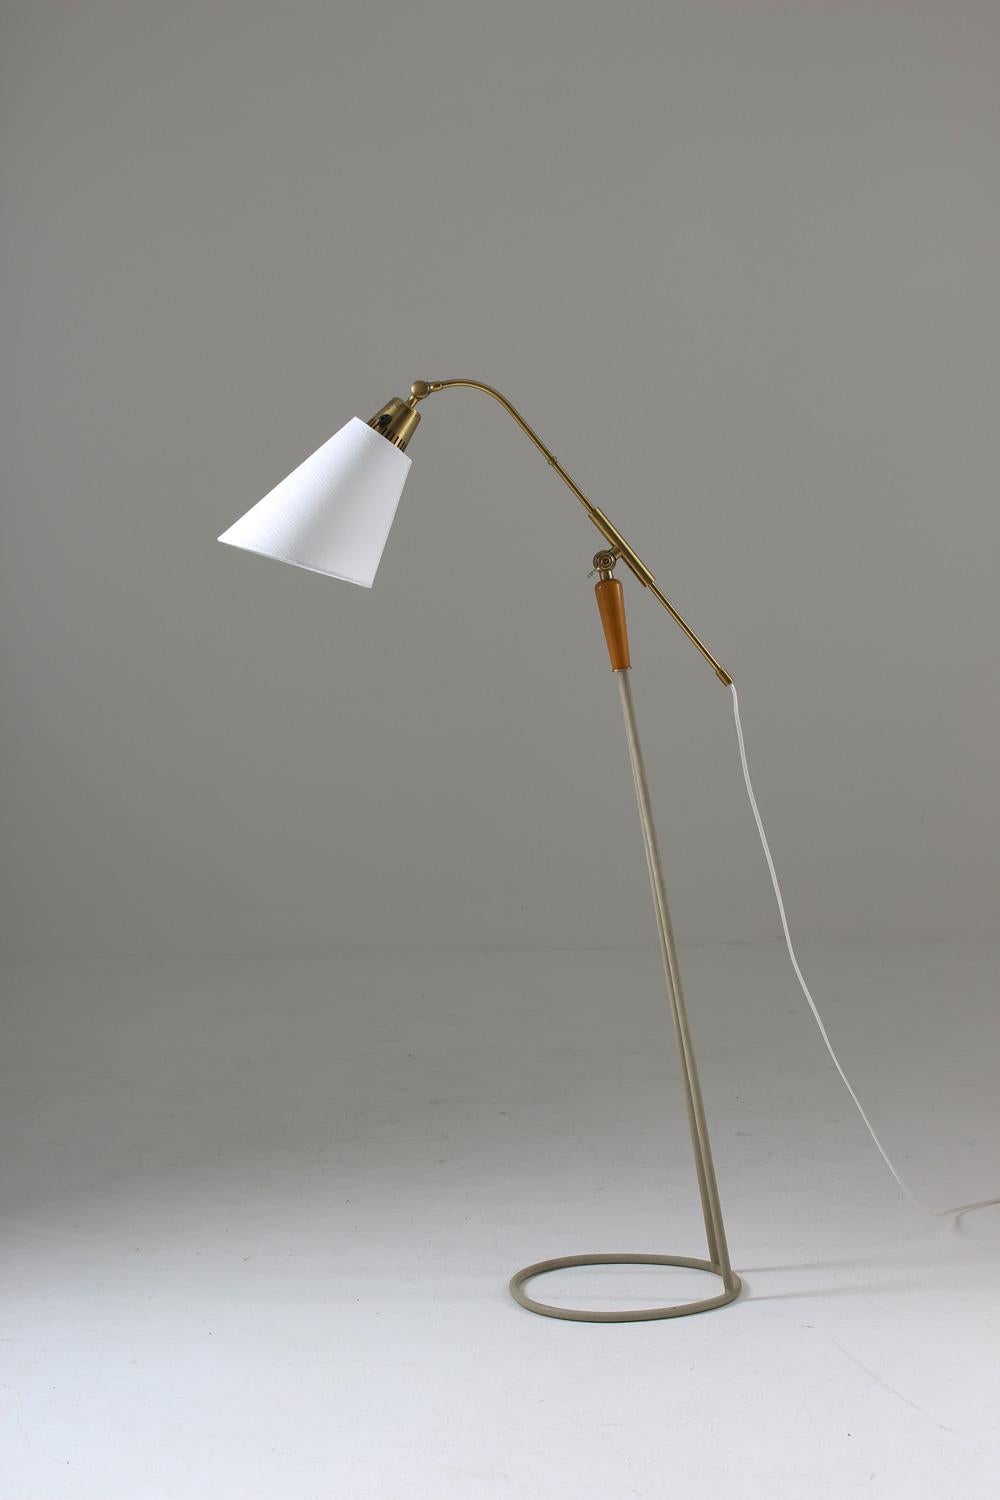 Lovely floor lamp in brass, metal and wood model 7069 by Swedish manufacturer Falkenbergs. 
The lamp is adjustable in both height and angle, making it a perfect reading lamp beside the sofa. All parts are original except for the new shade and